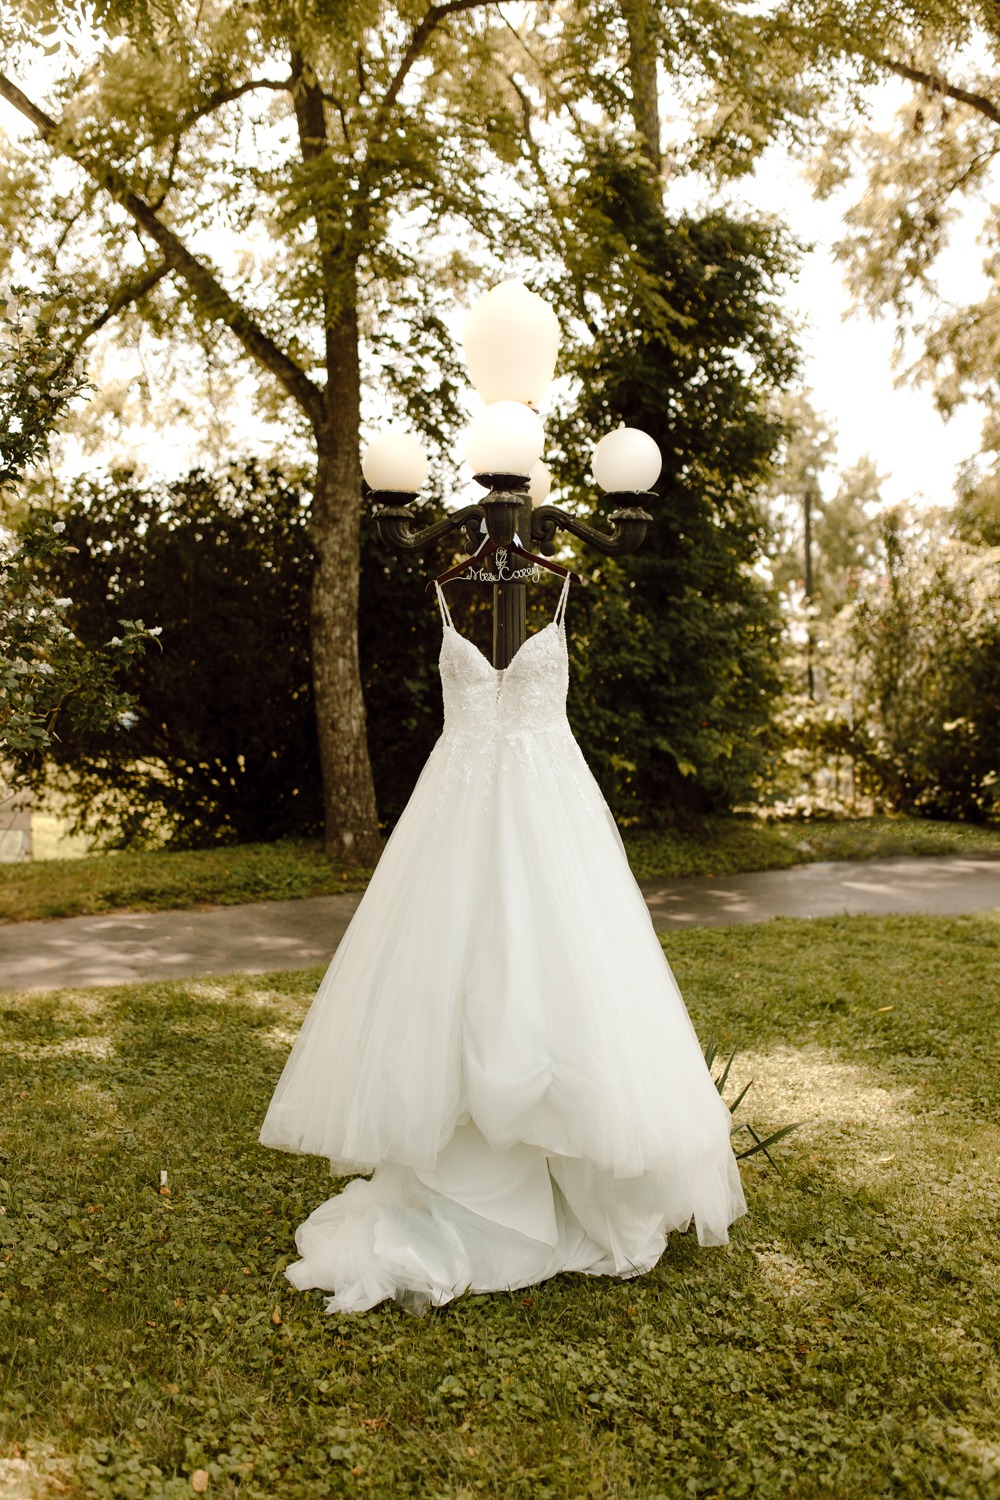 An exquisite wedding dress delicately hanging on a light post in Mt. Sterling, Kentucky. The dress, bathed in soft light, radiates elegance and captures the enchanting atmosphere of the pre-wedding preparations in this picturesque location.